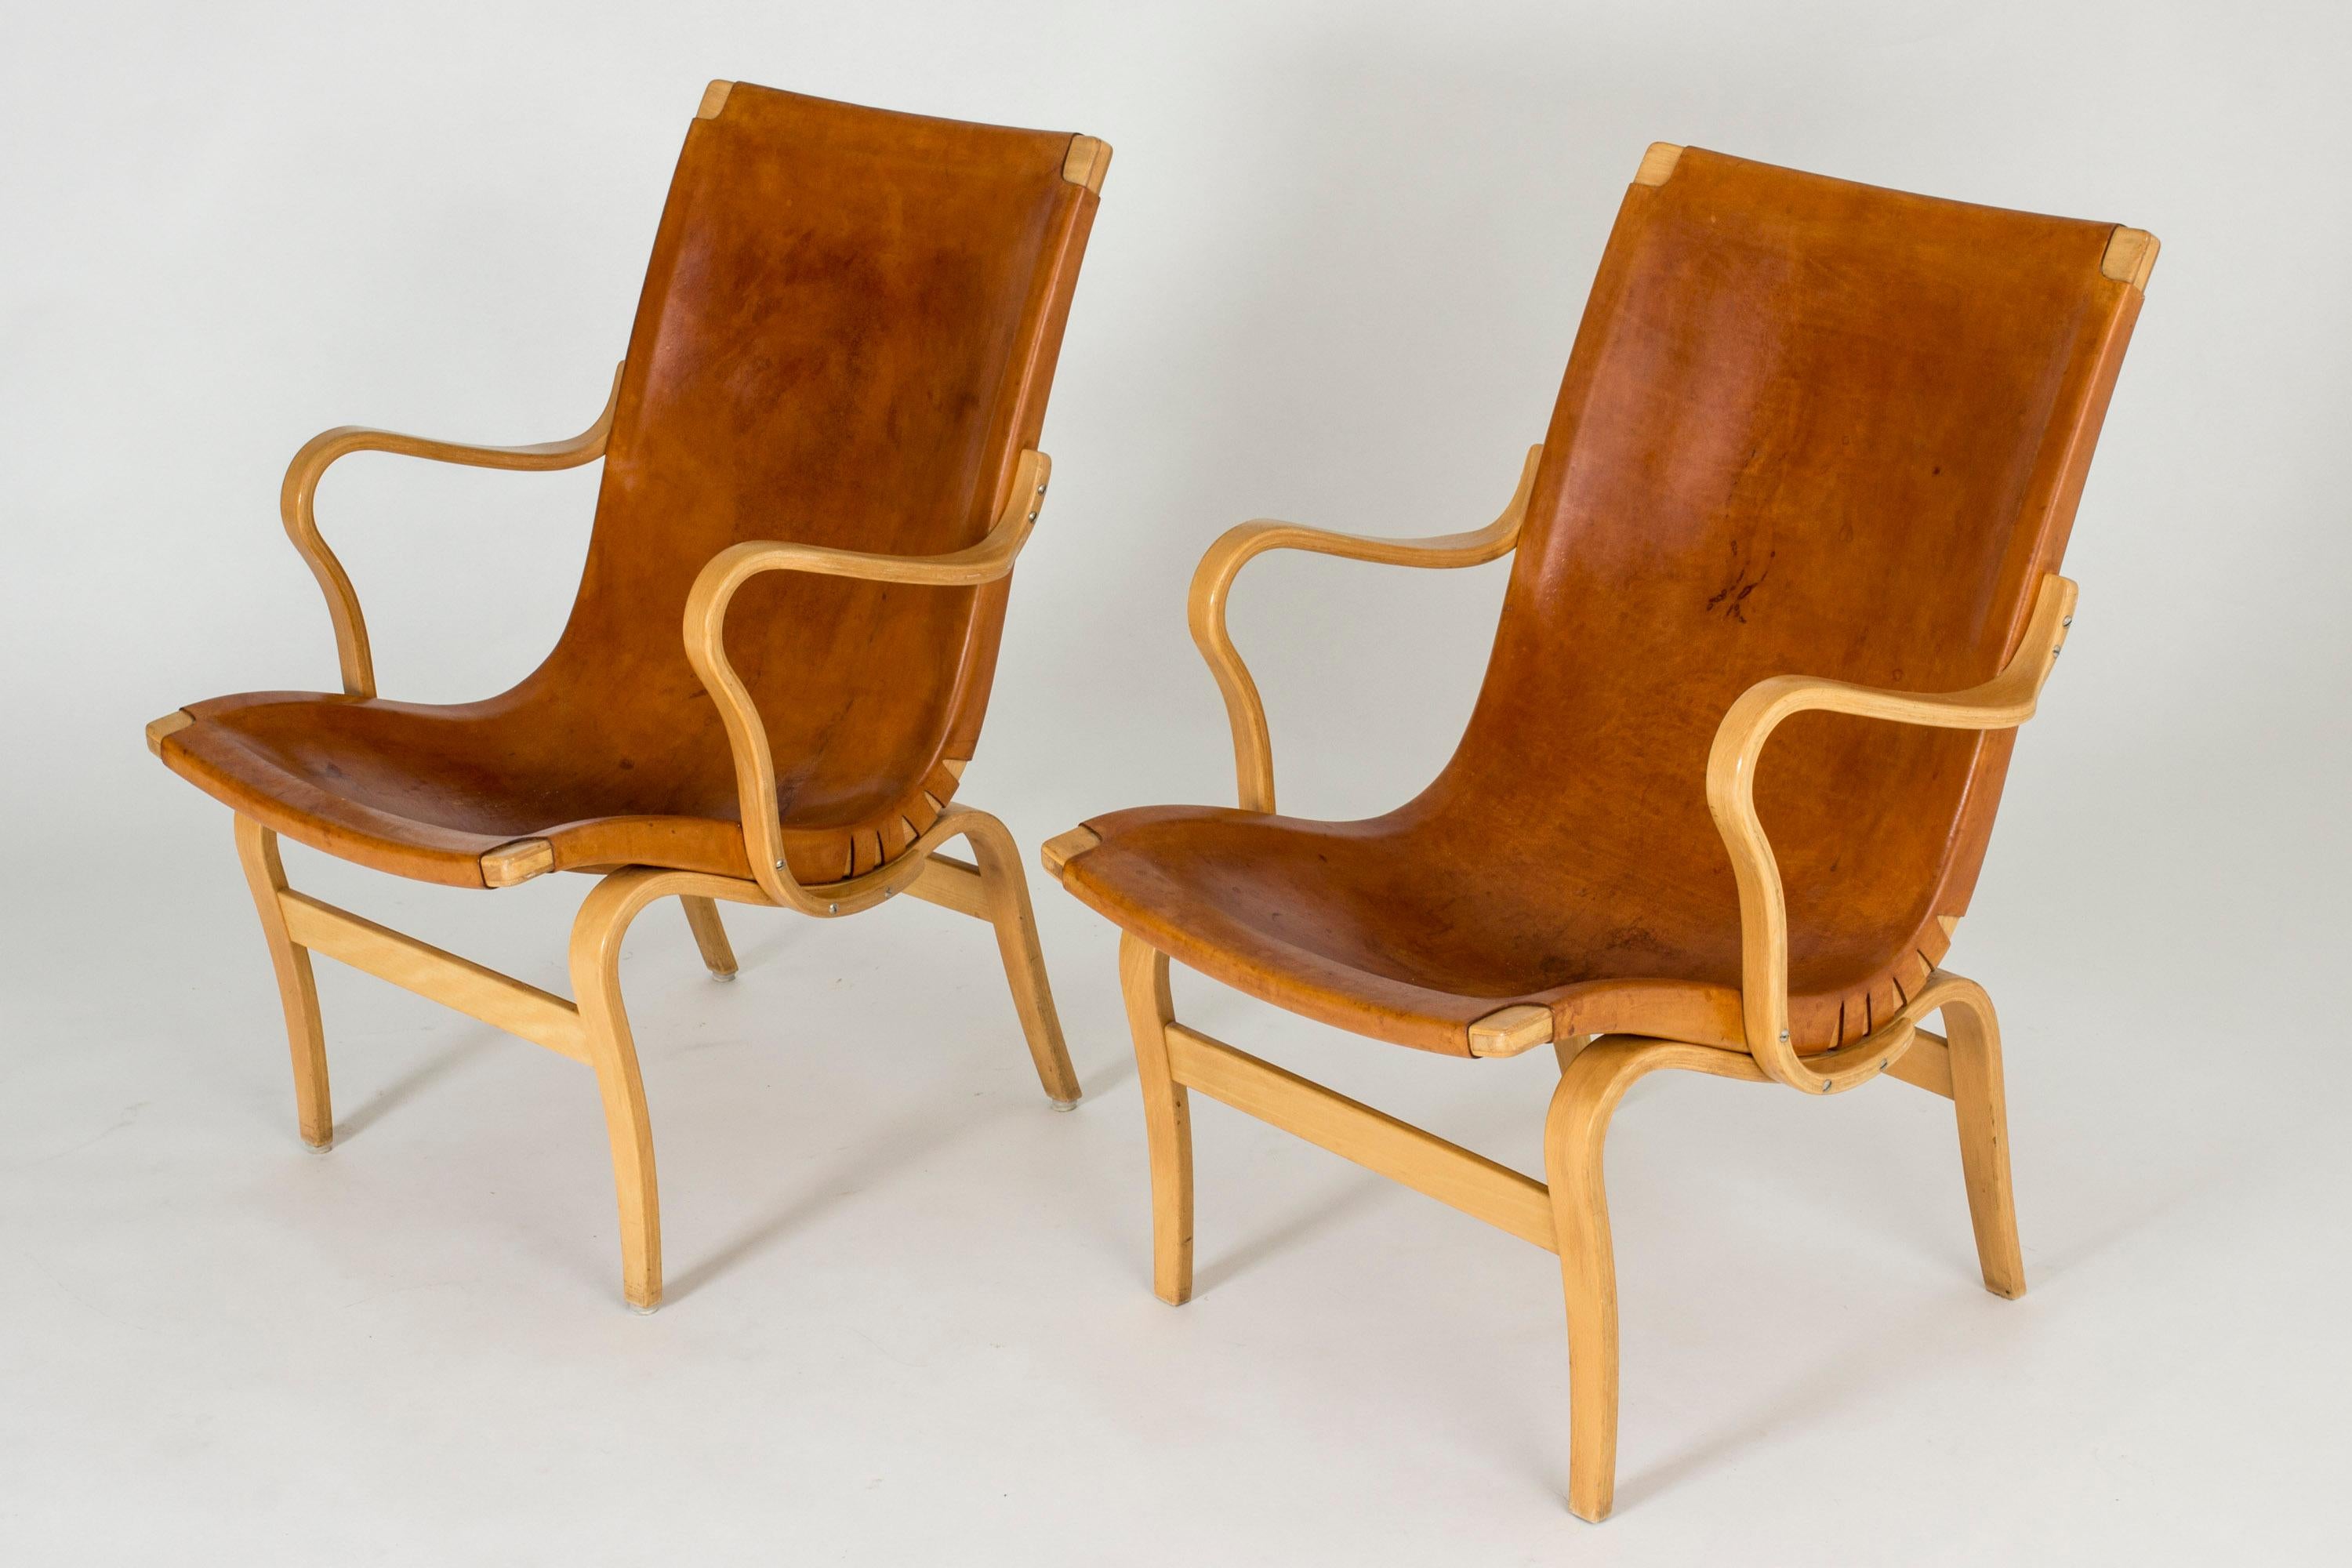 Pair of lovely “Eva” lounge chairs by Bruno Mathsson, with leather seats on beech bentwood frames. Beautifully patinated natural colored leather.

  